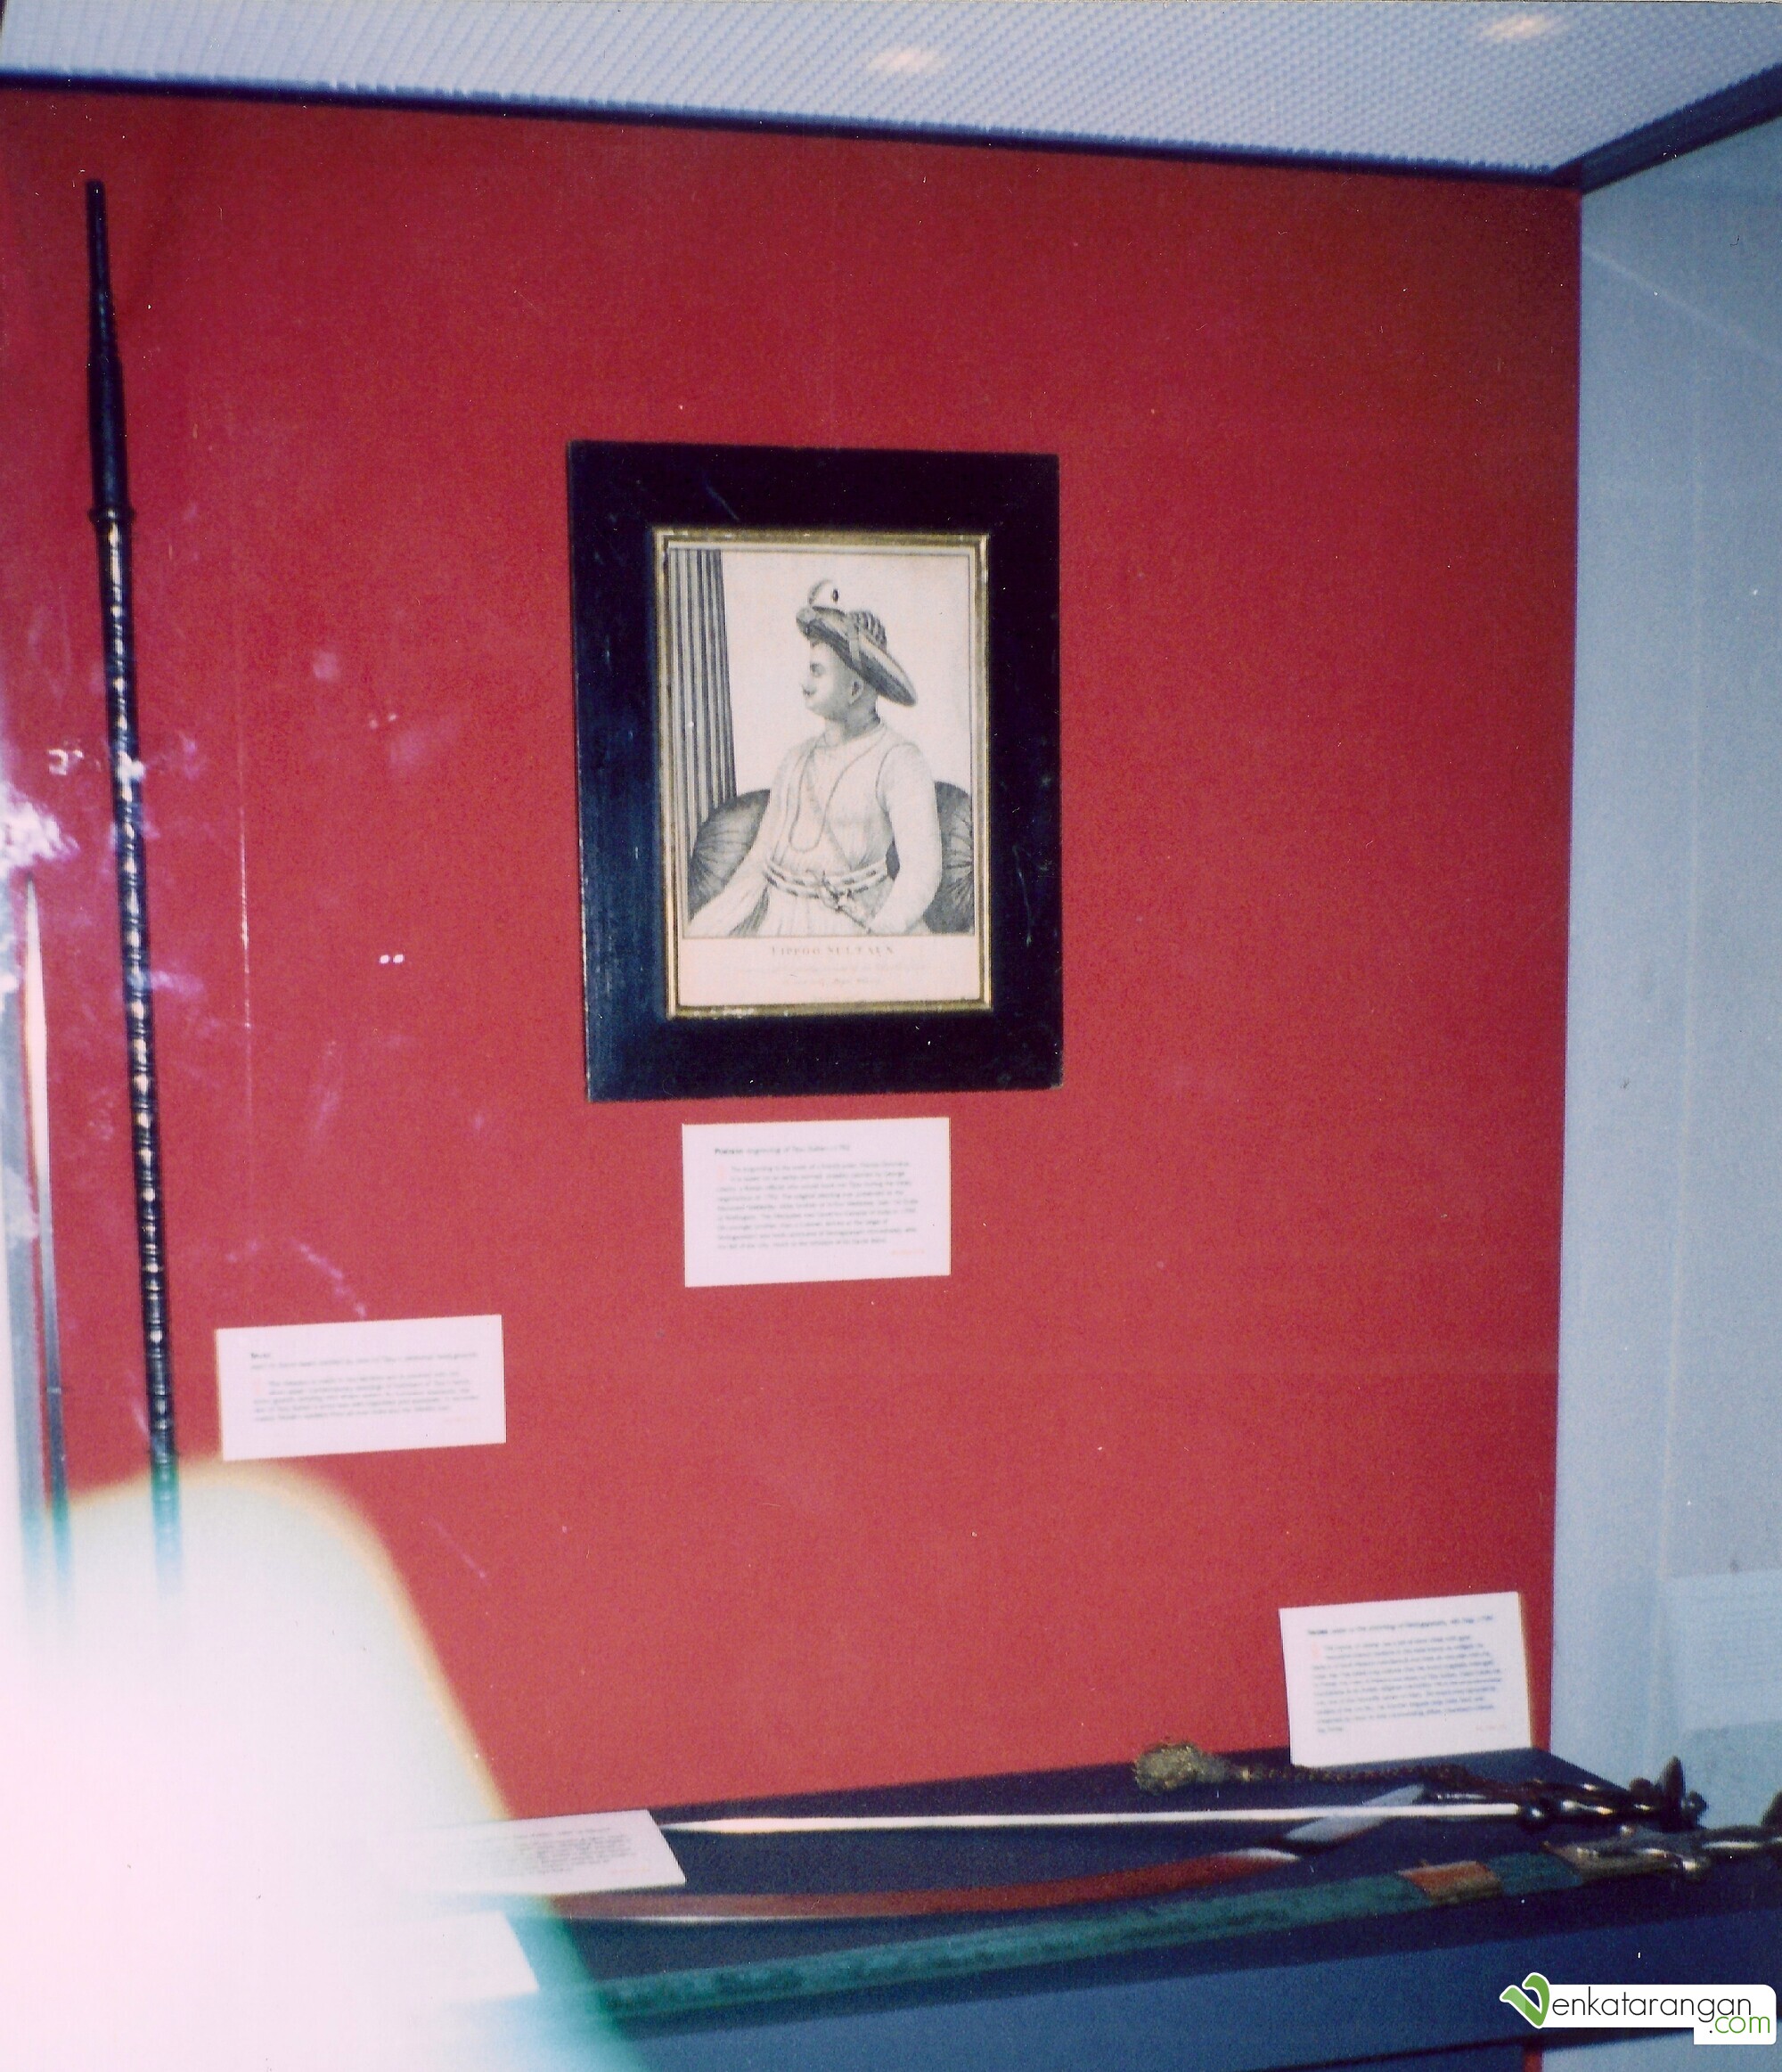 The above picture is a related one to Tipu Sultan, it was taken by me in 1998 at the Royal Museum of Scotland, Edinburgh. It shows the swords and  weapons which were taken away by the victorious scottish troops from the place of Tippu Sultan after his fall. 